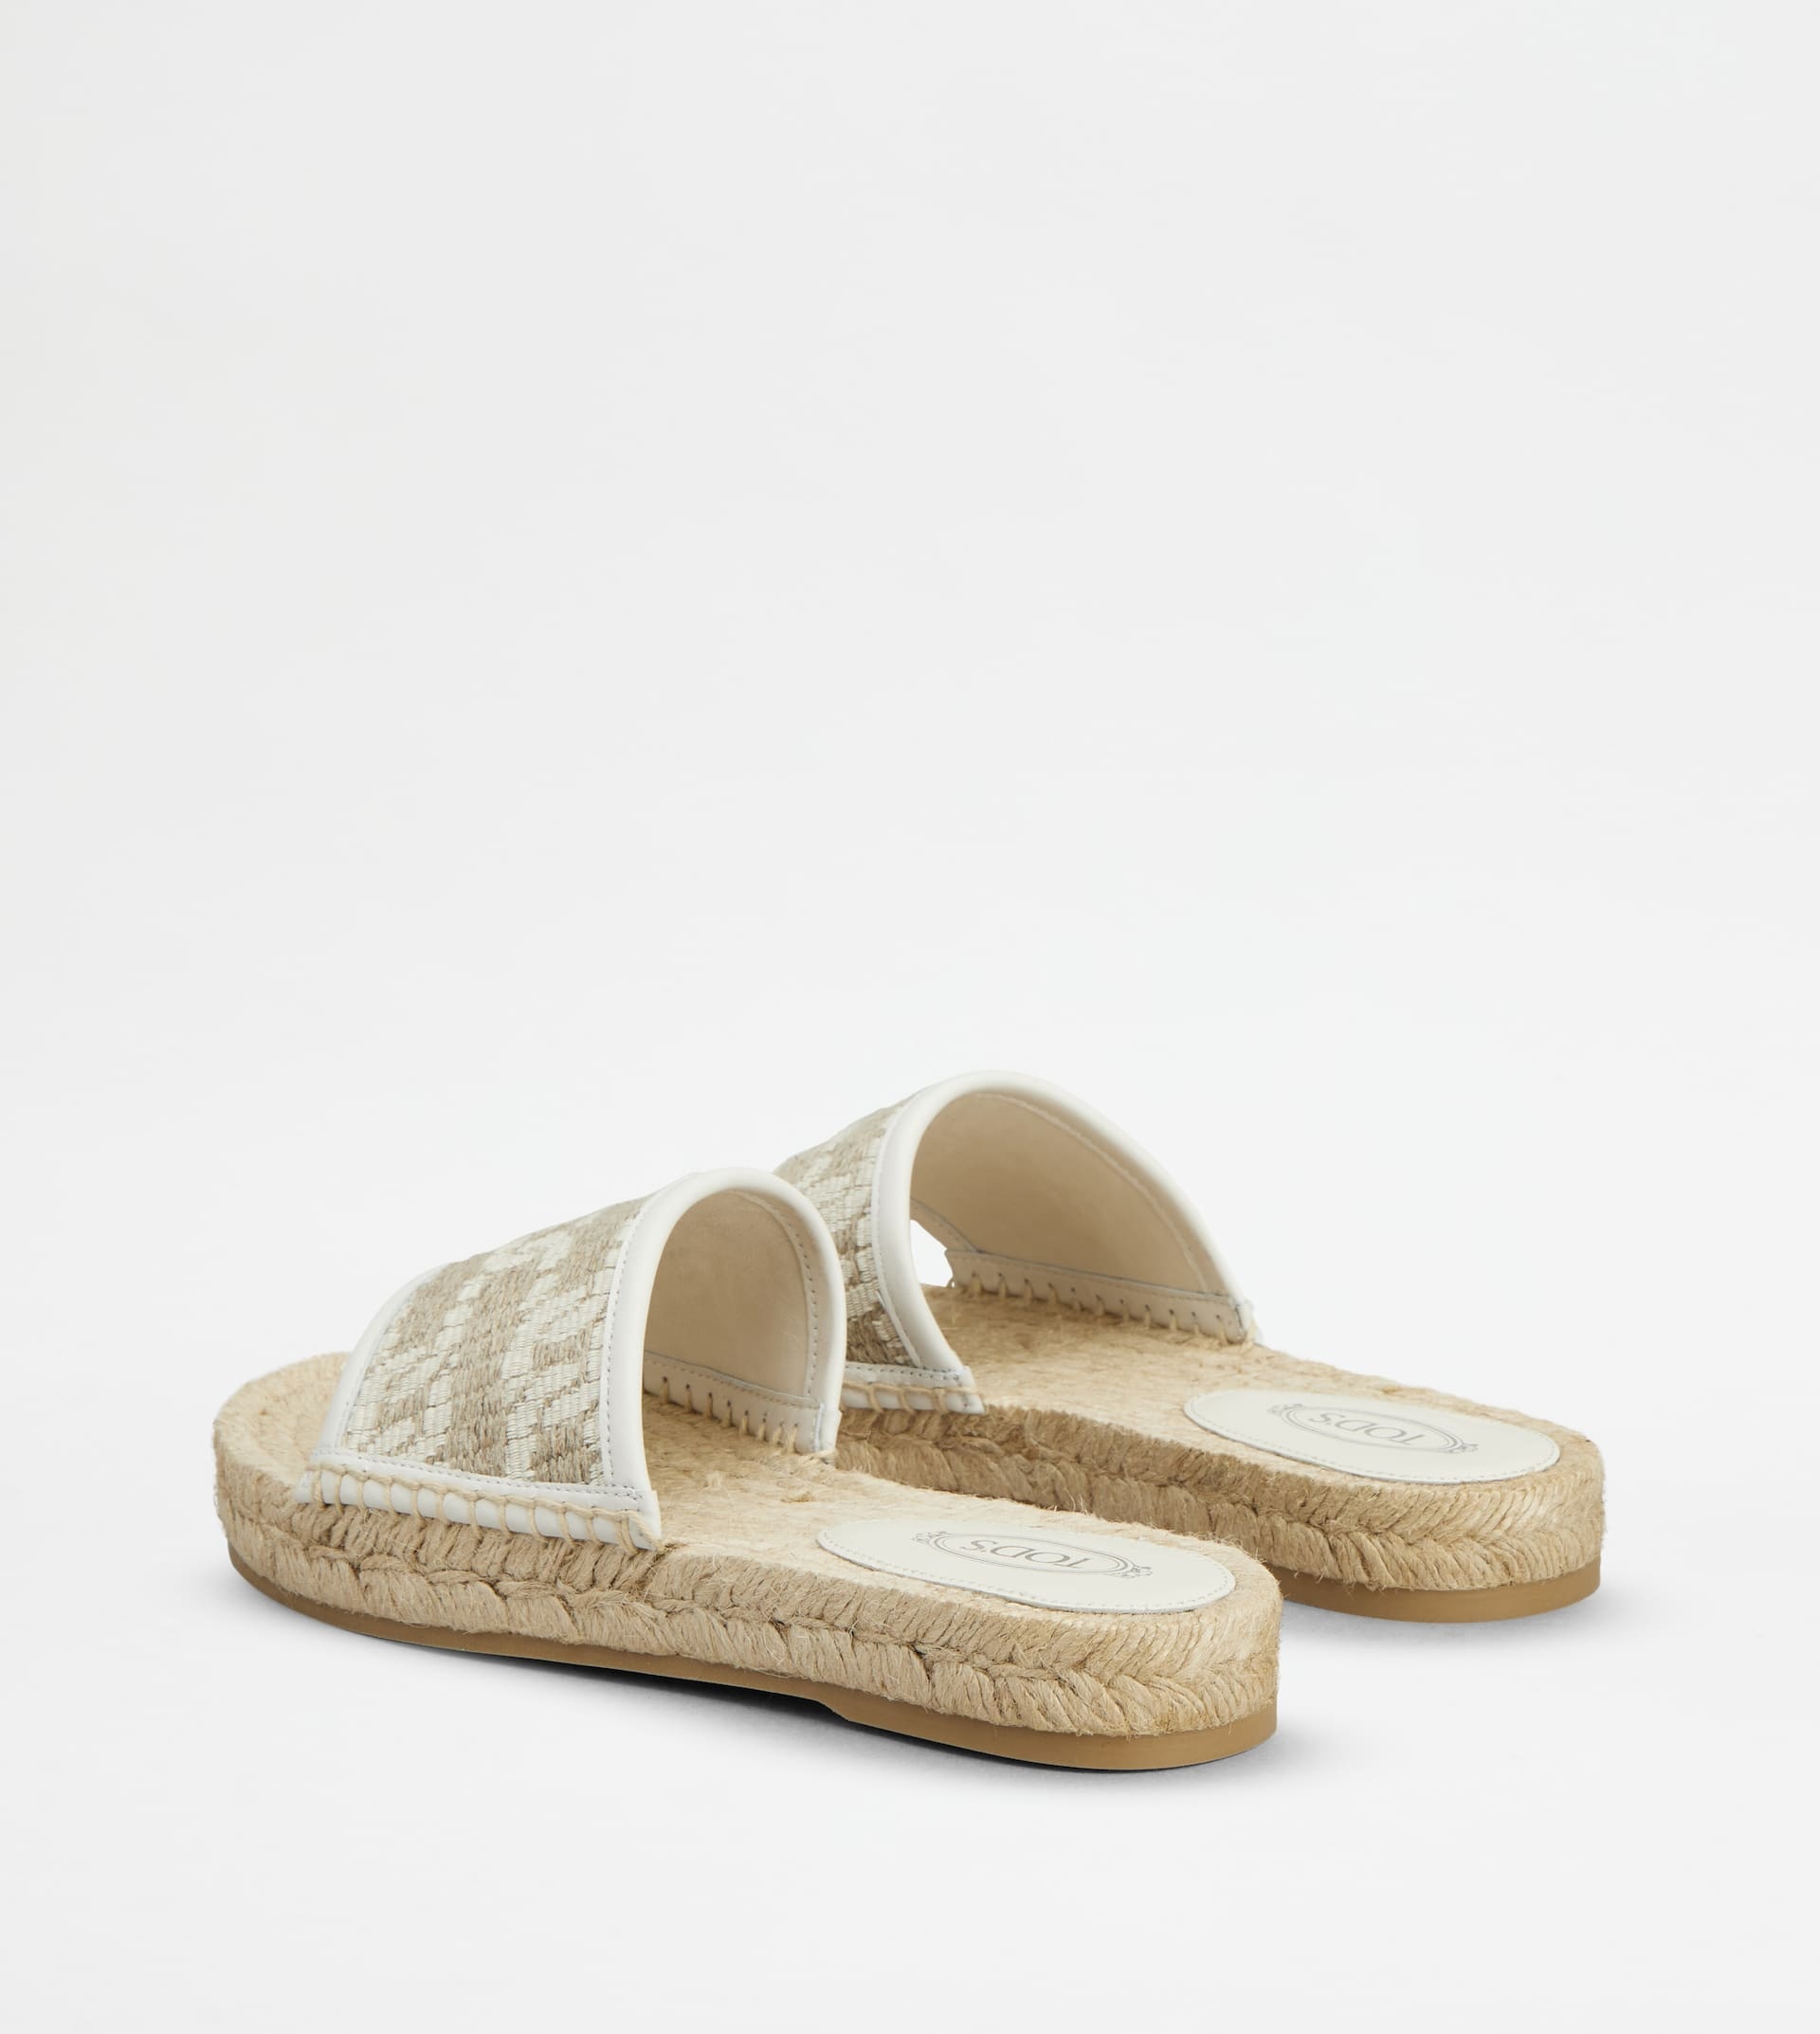 SANDALS IN LEATHER AND FABRIC - OFF WHITE, BEIGE - 2